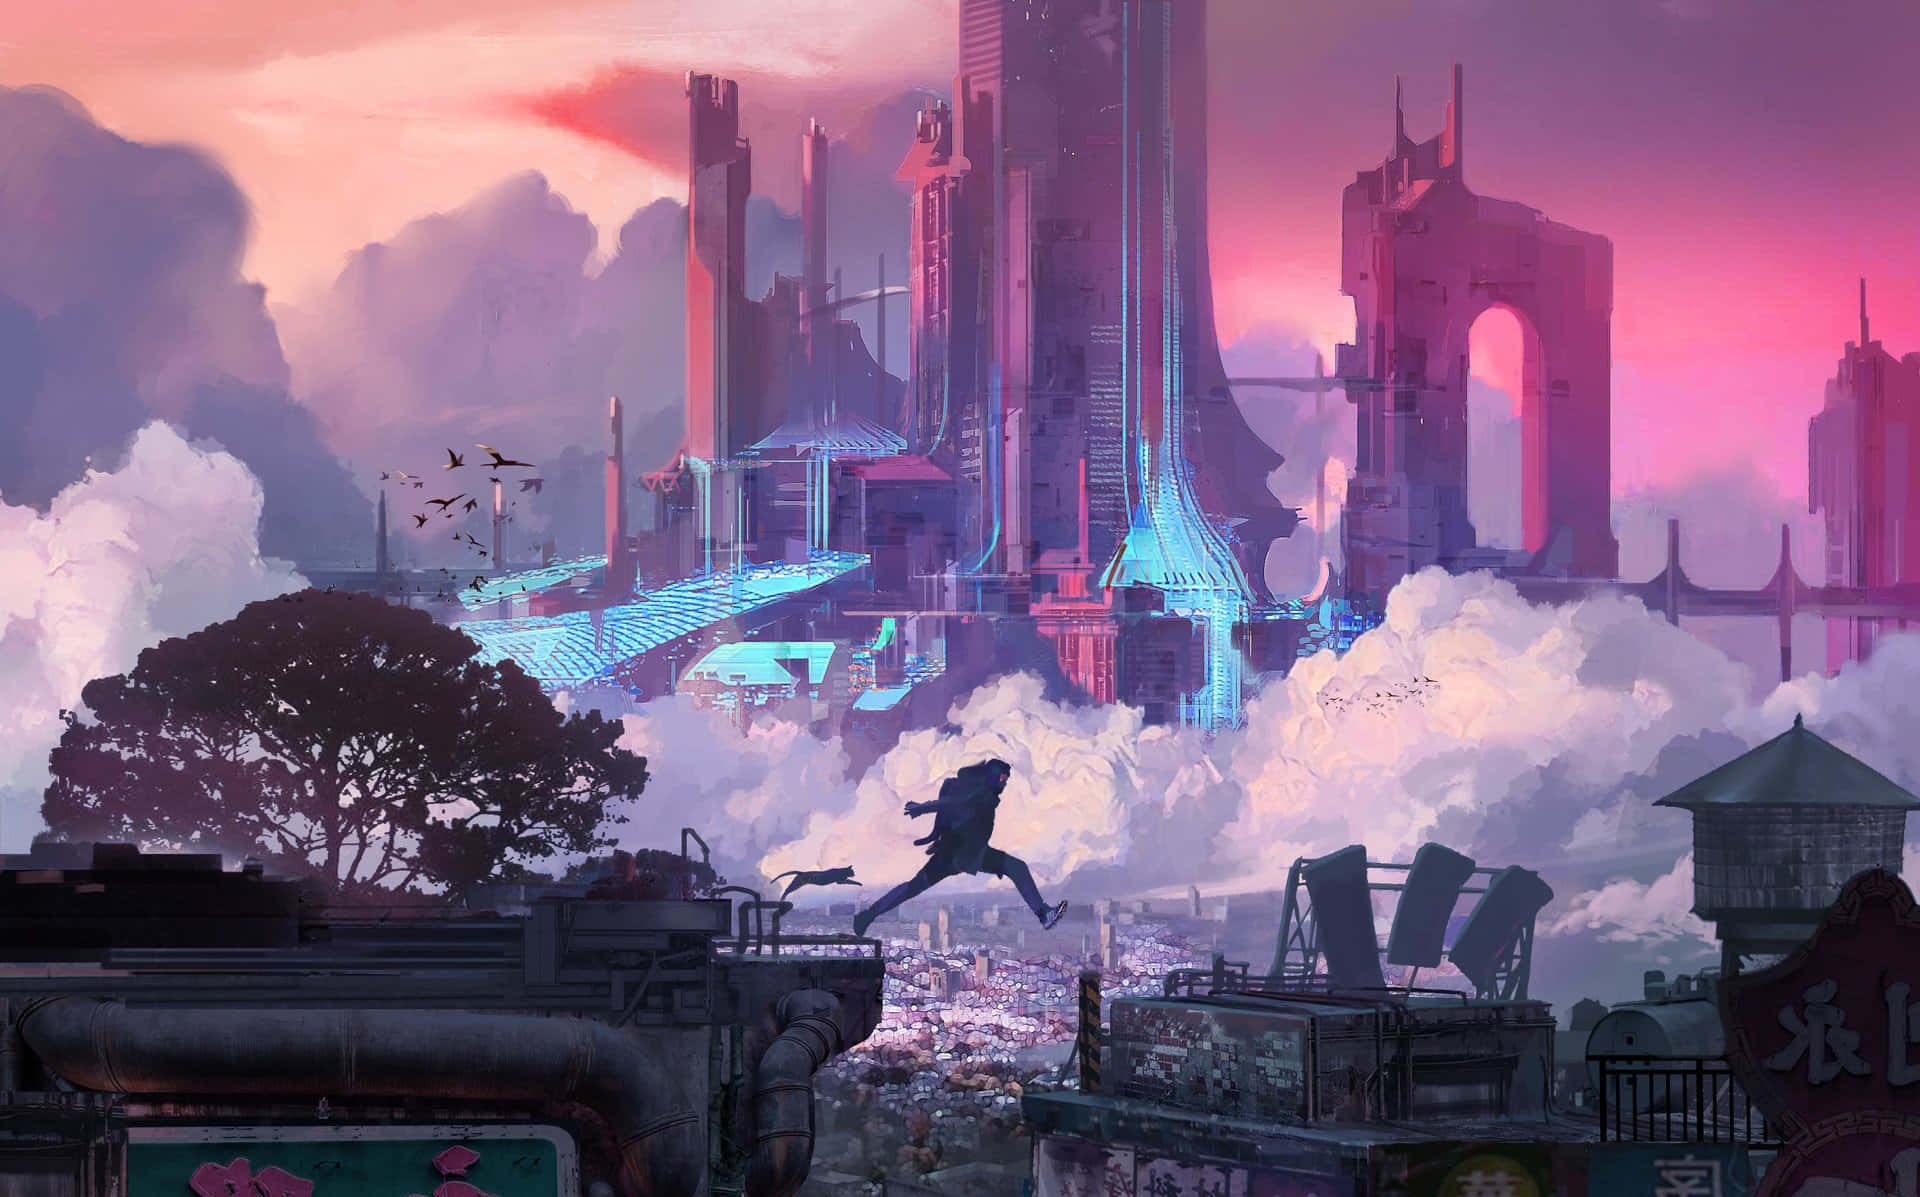 Explore the unknown as you wander through the high tech wonders of Cyberpunk City.